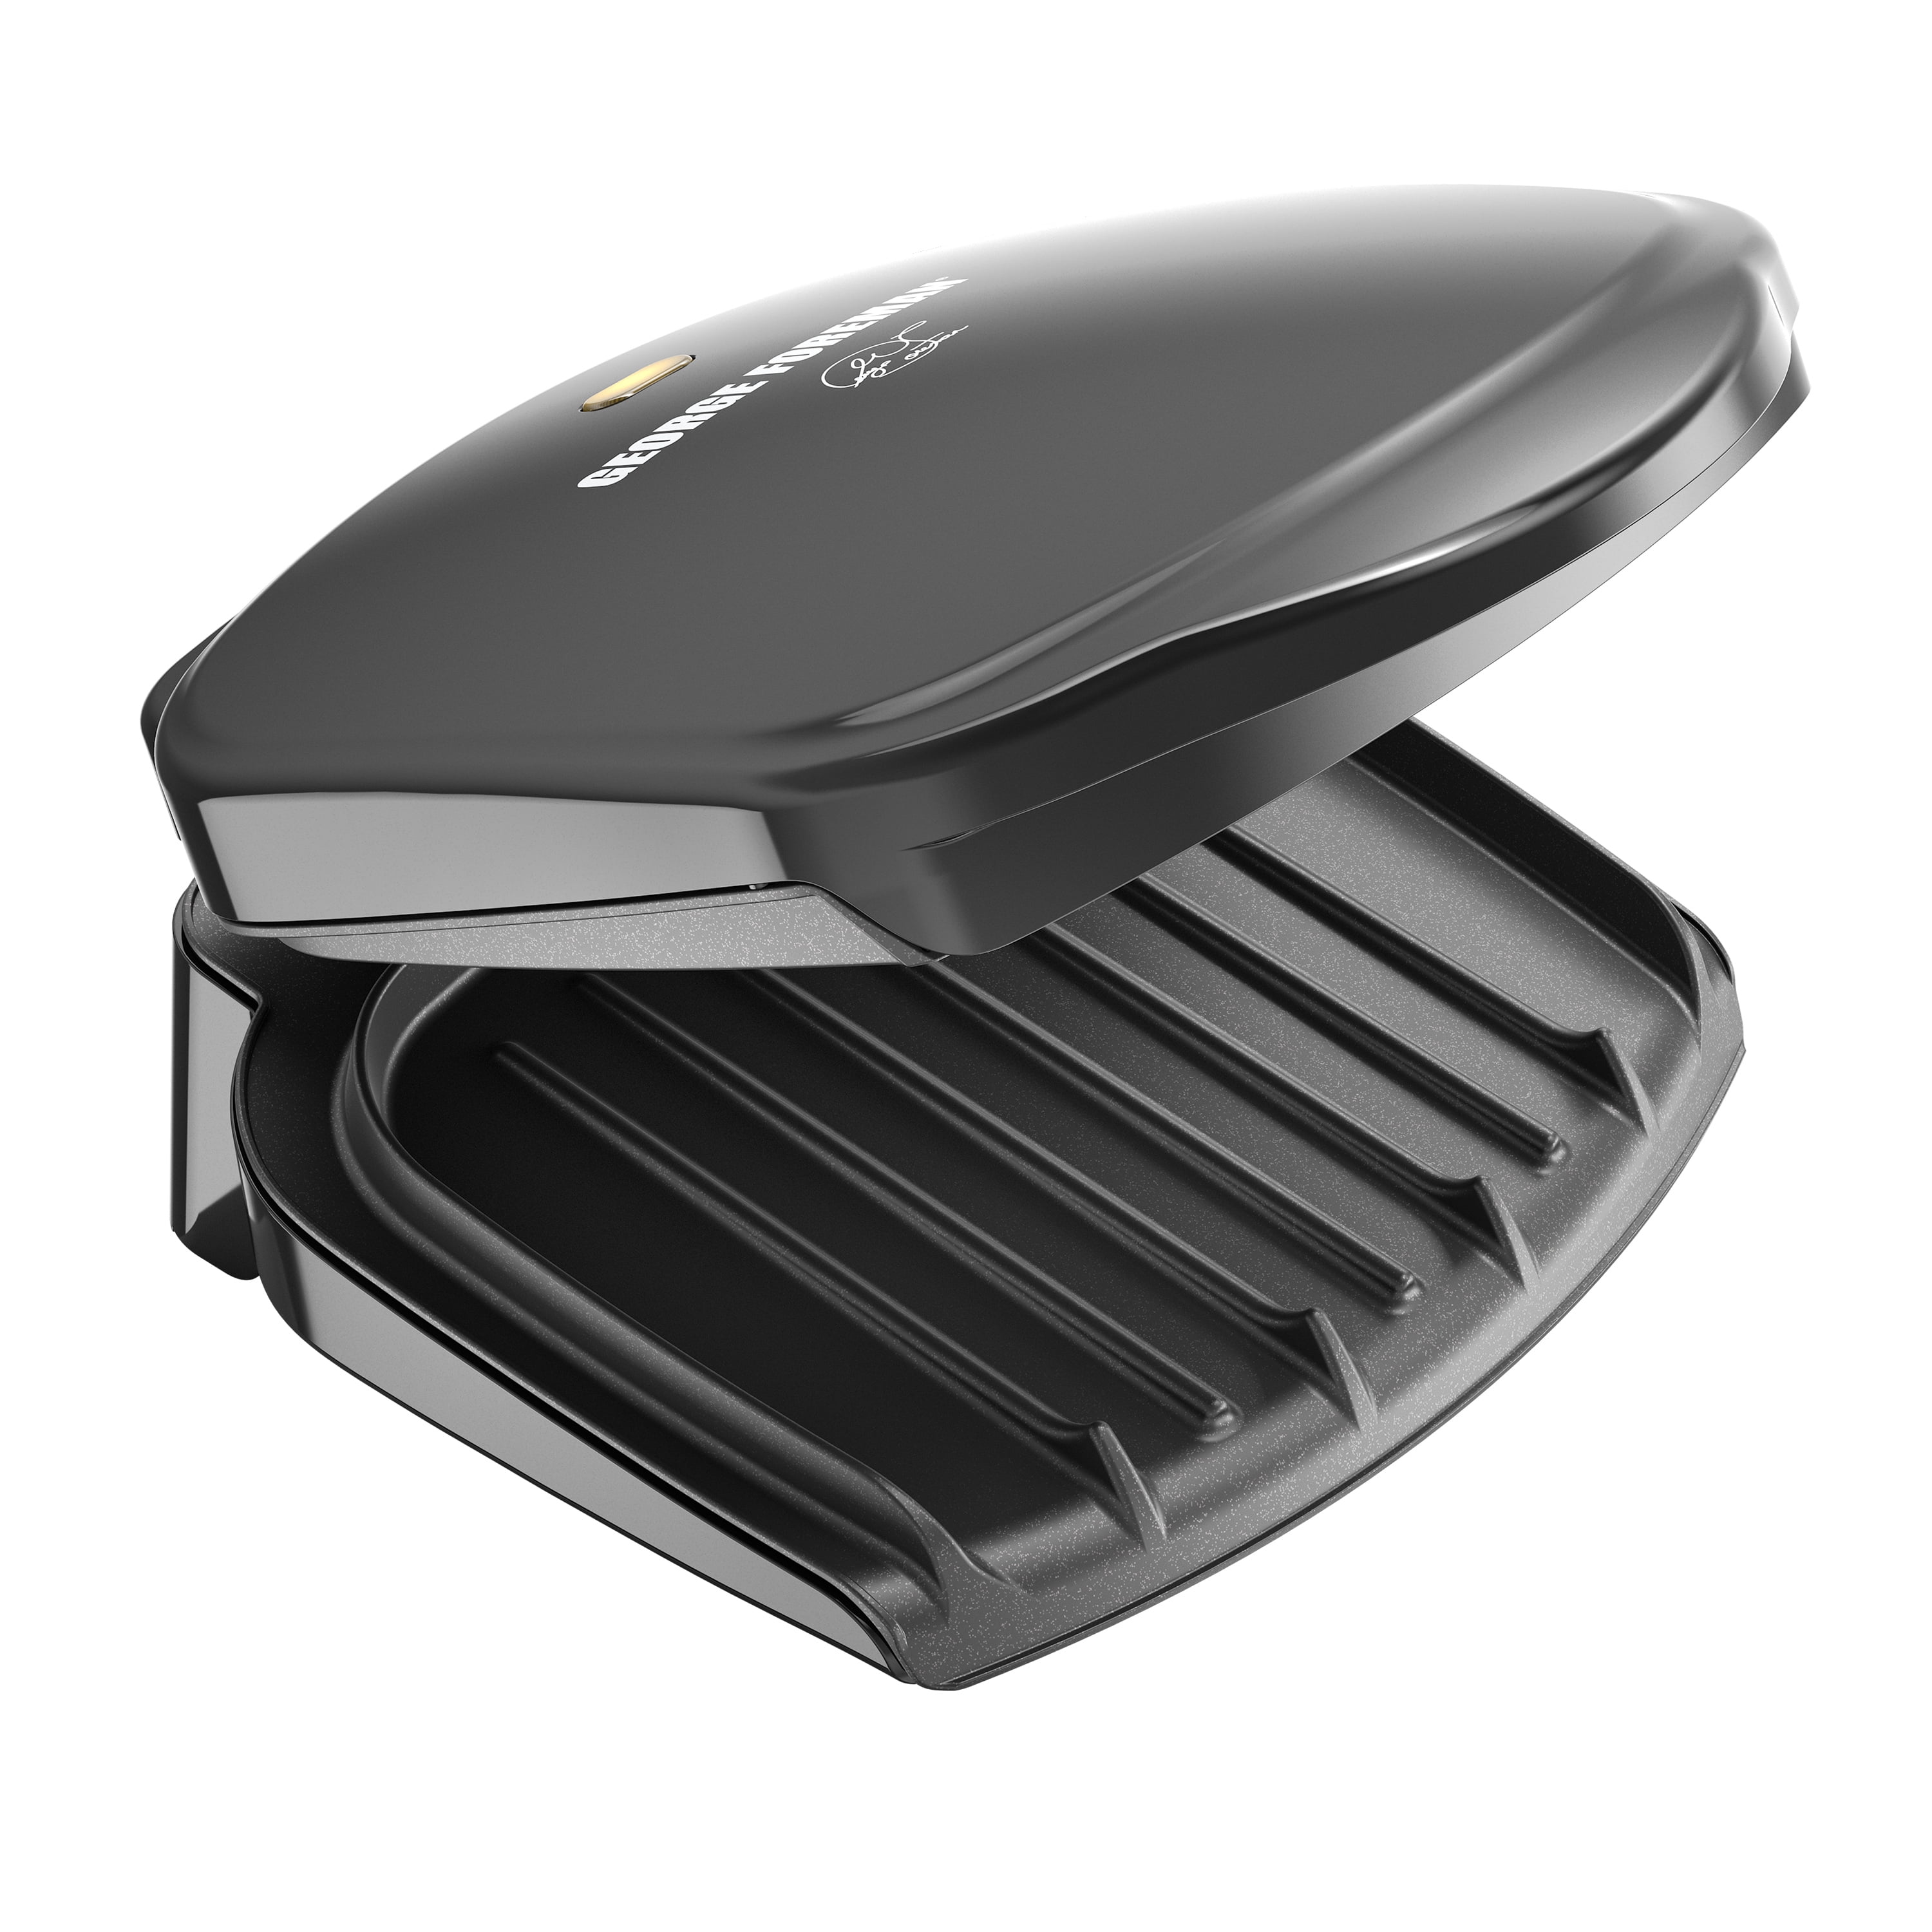 George Foreman 2-Serving Classic Plate Electric Indoor Grill and Panini Press, Black, GR10B - 2